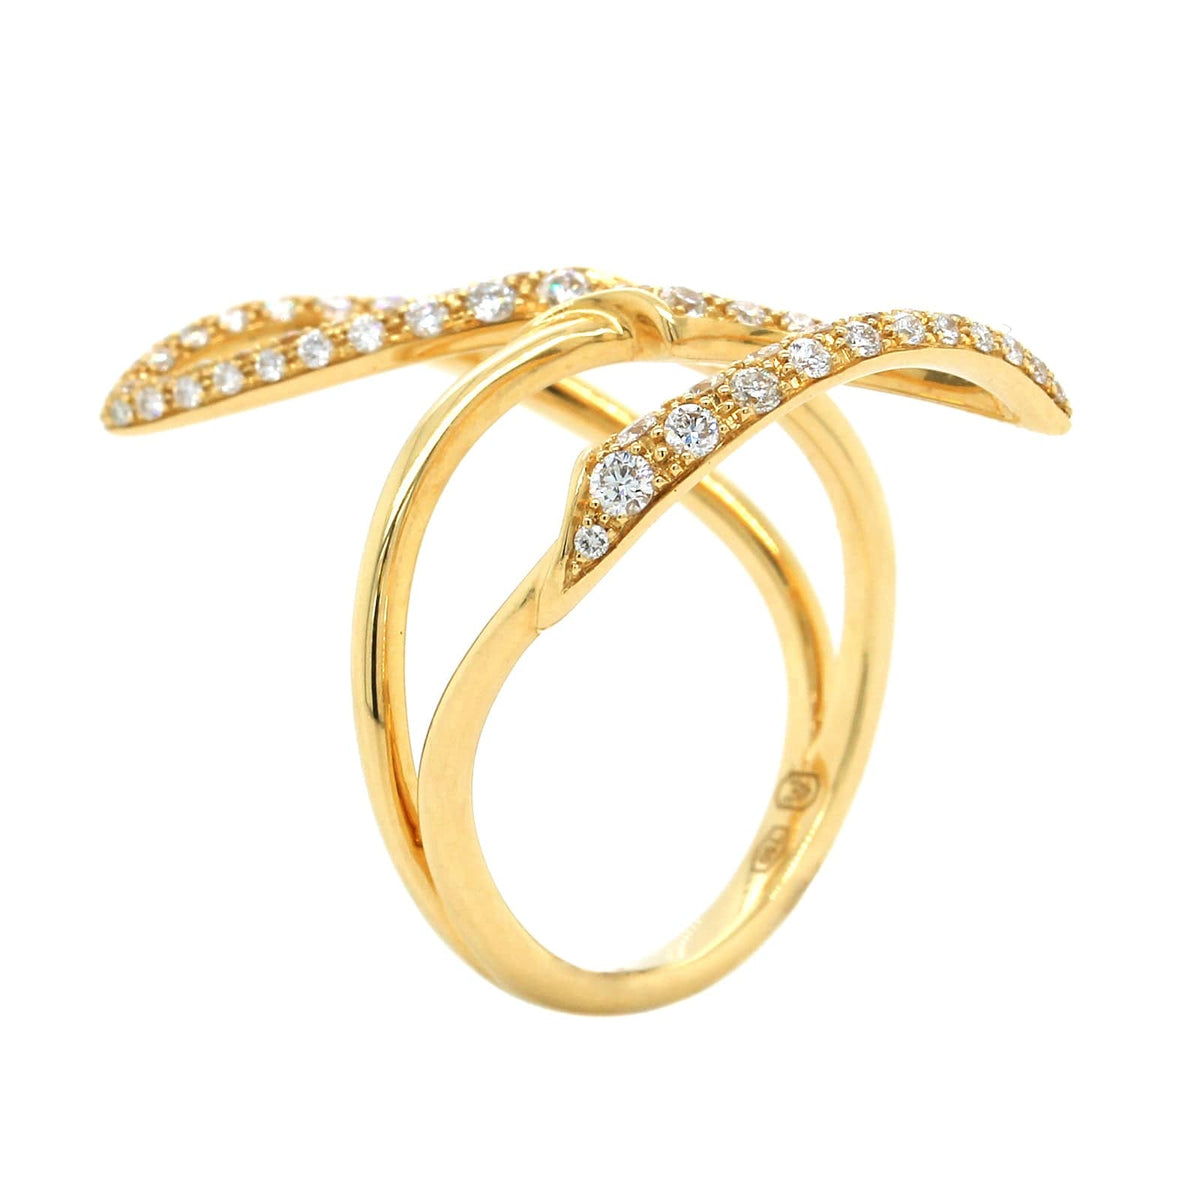 Etho Maria 18K Yellow Gold Pave Diamond Open Bypass Ring